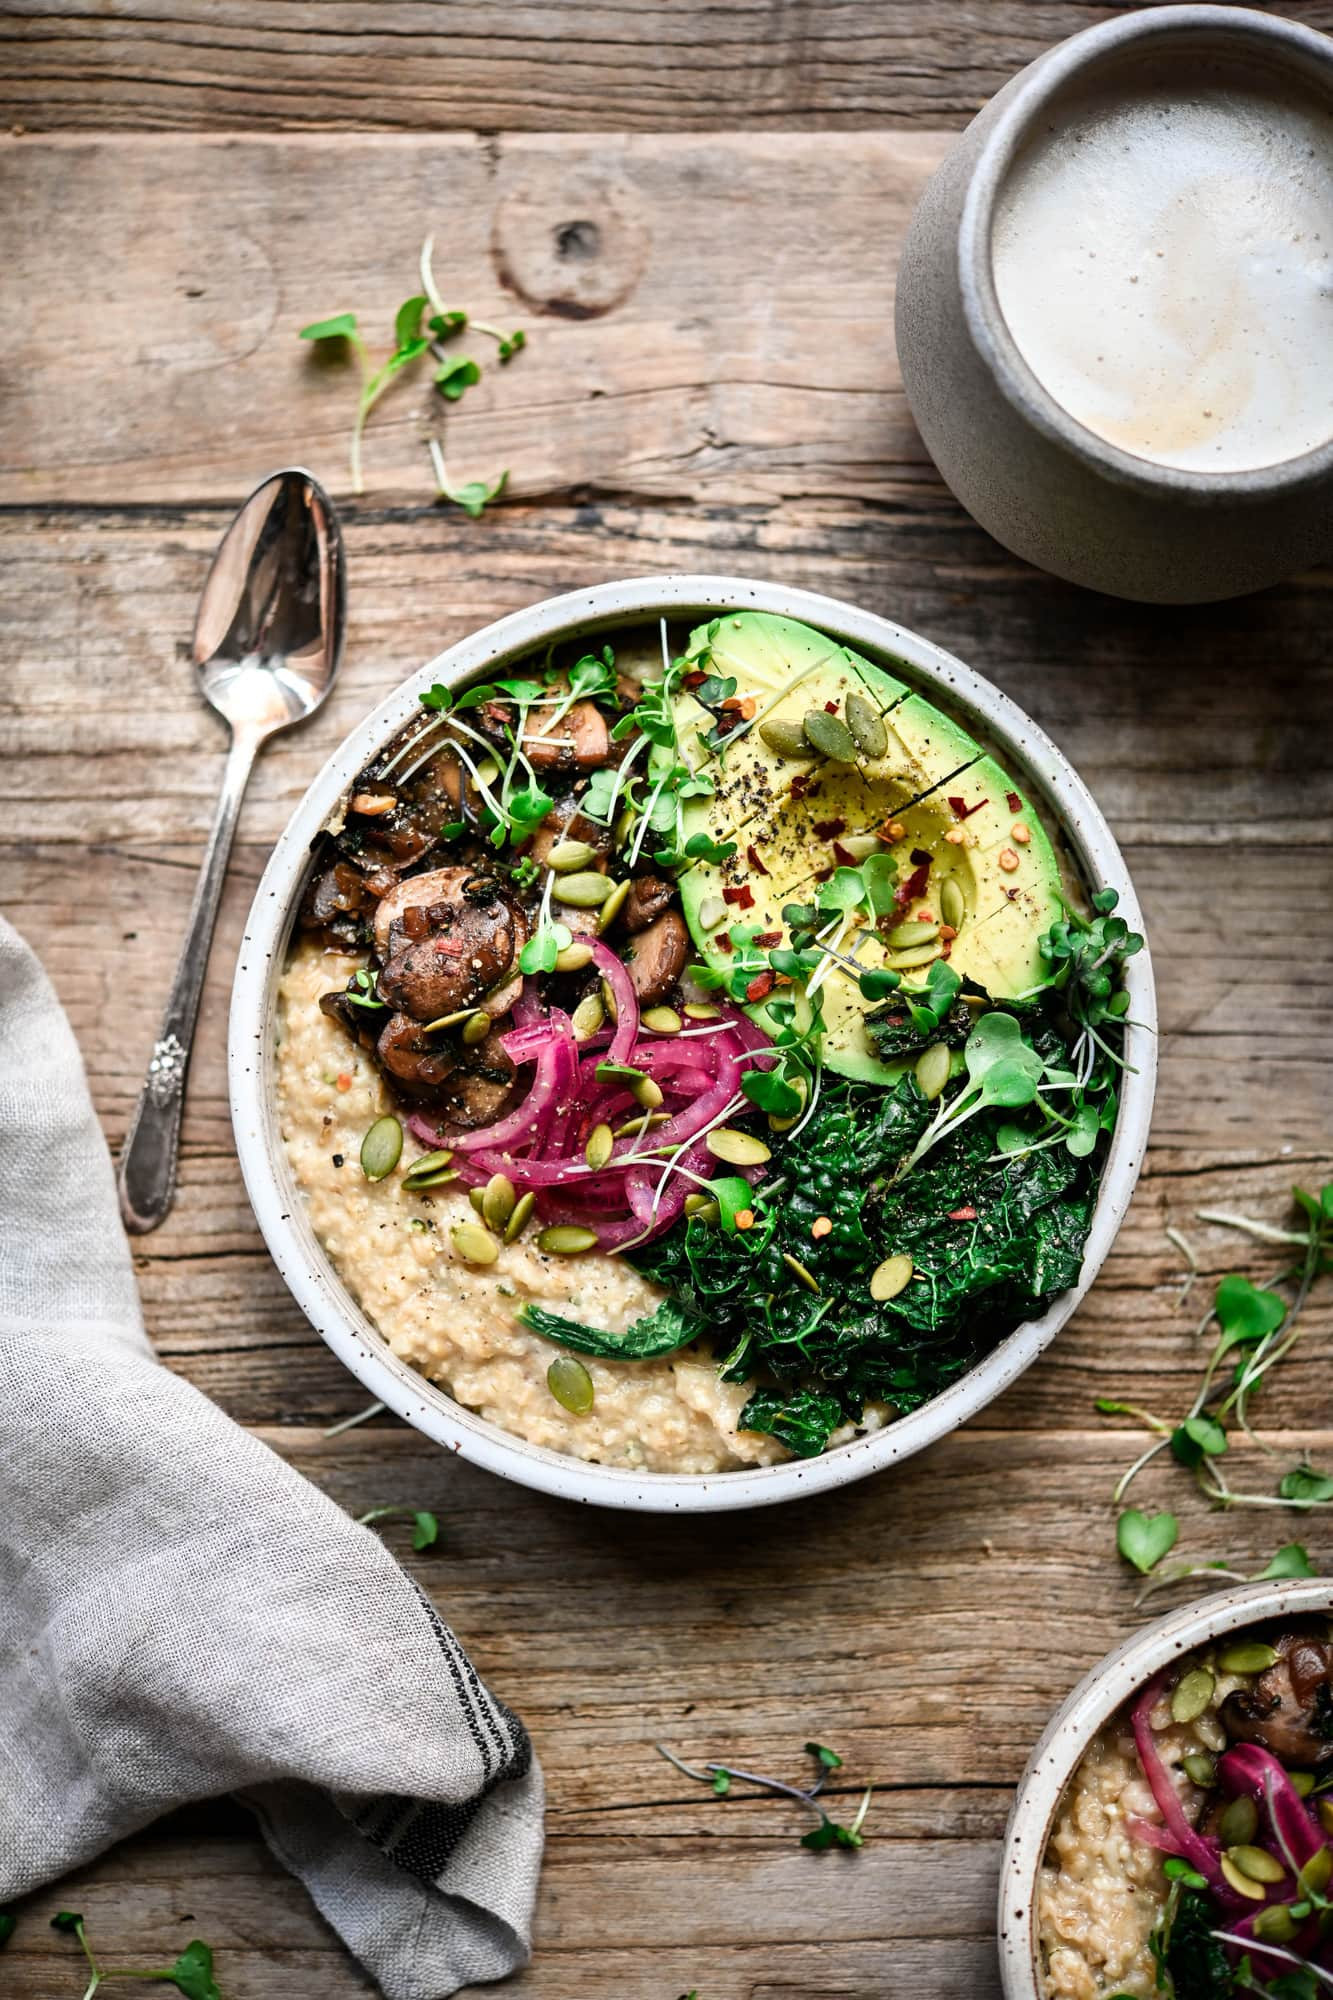 SAVORY VEGAN OATMEAL WITH MUSHROOMS, KALE AND AVOCADO Recipe from savorykitchen.com